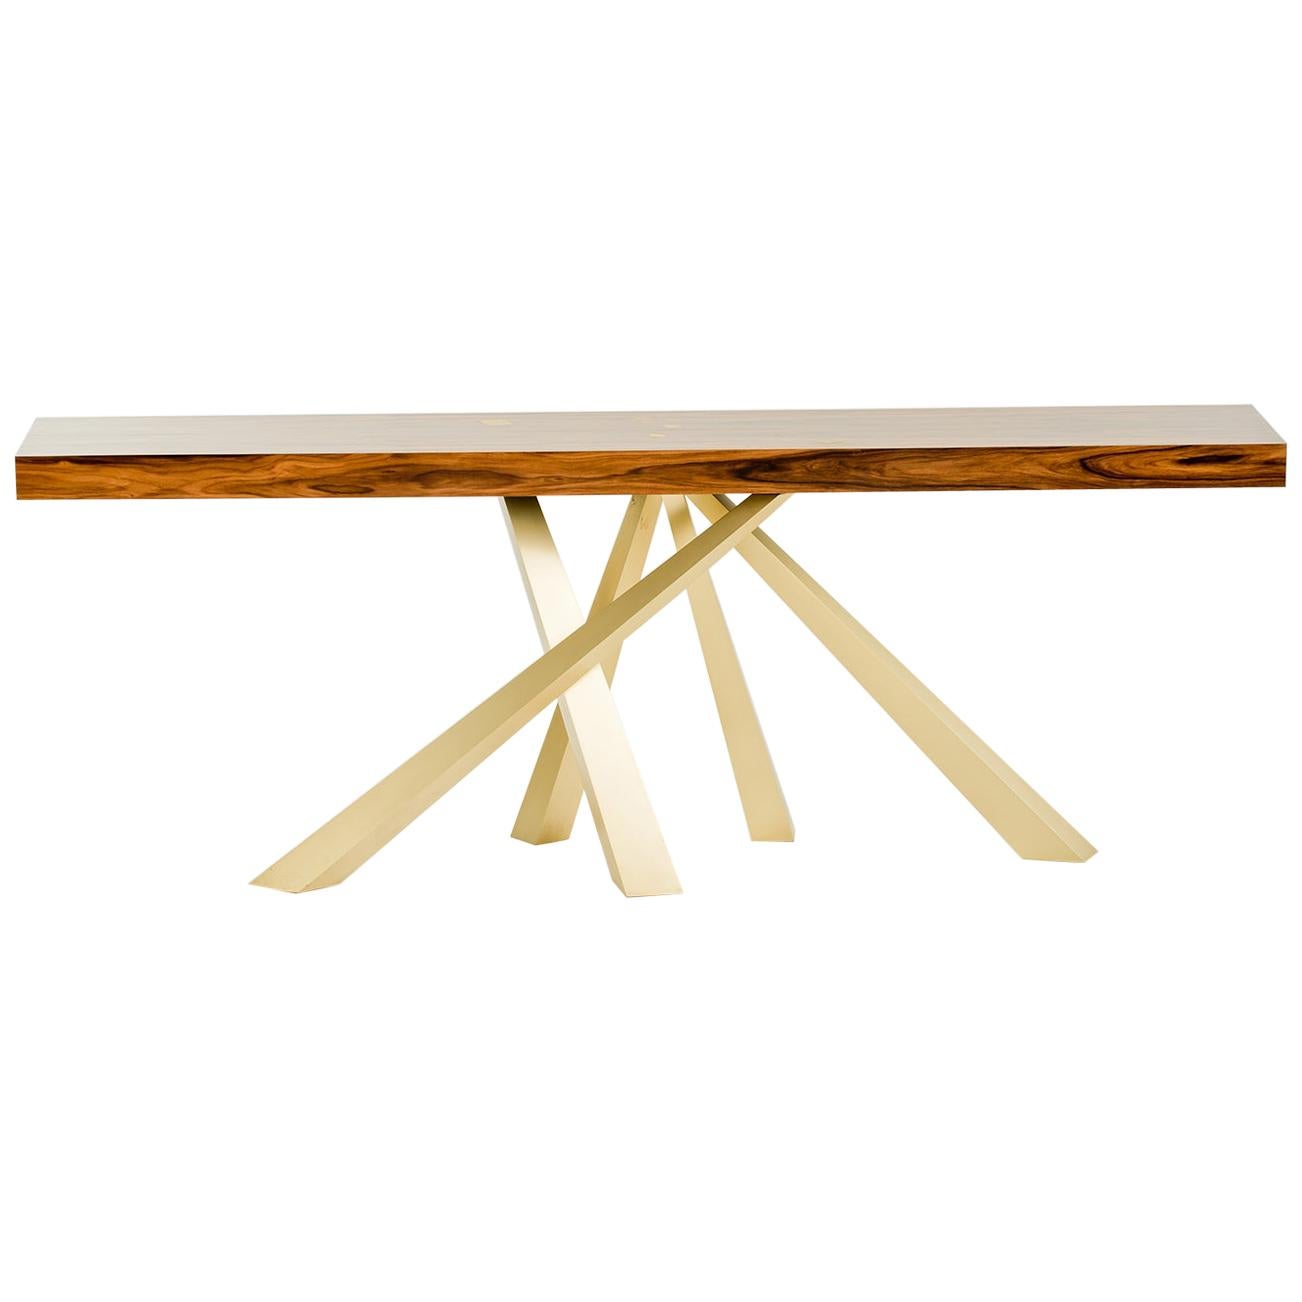 Prince Console Table, Contemporary, Rosewood and Gold Leaf, by Dean and Dahl